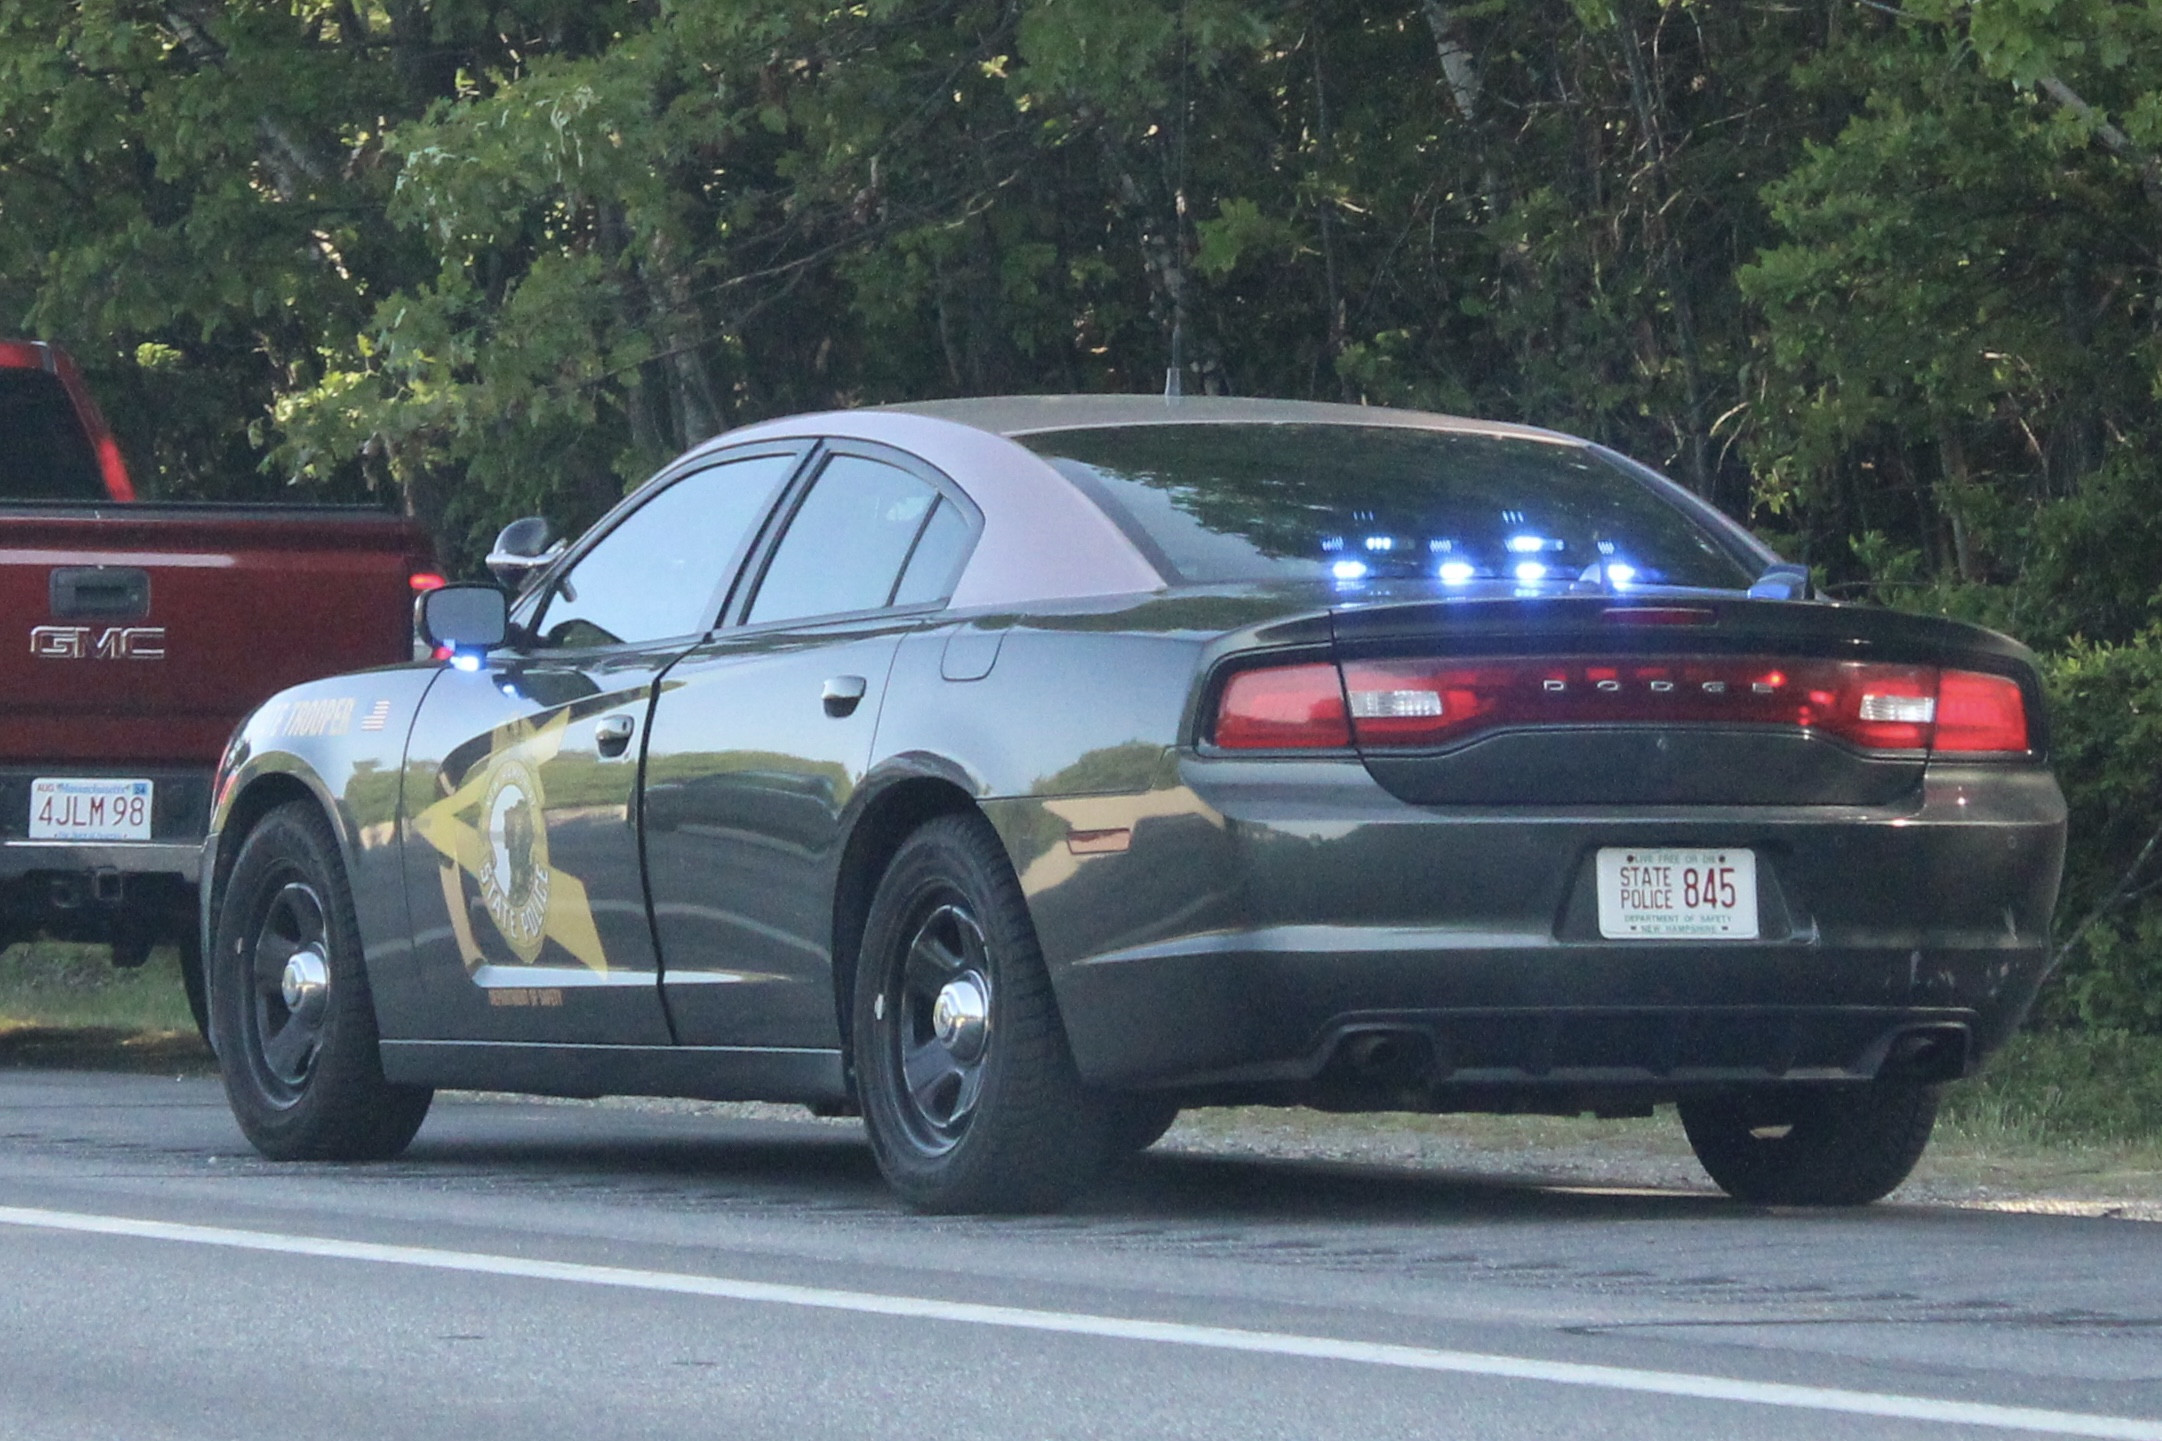 A photo  of New Hampshire State Police
            Cruiser 845, a 2011-2014 Dodge Charger             taken by @riemergencyvehicles